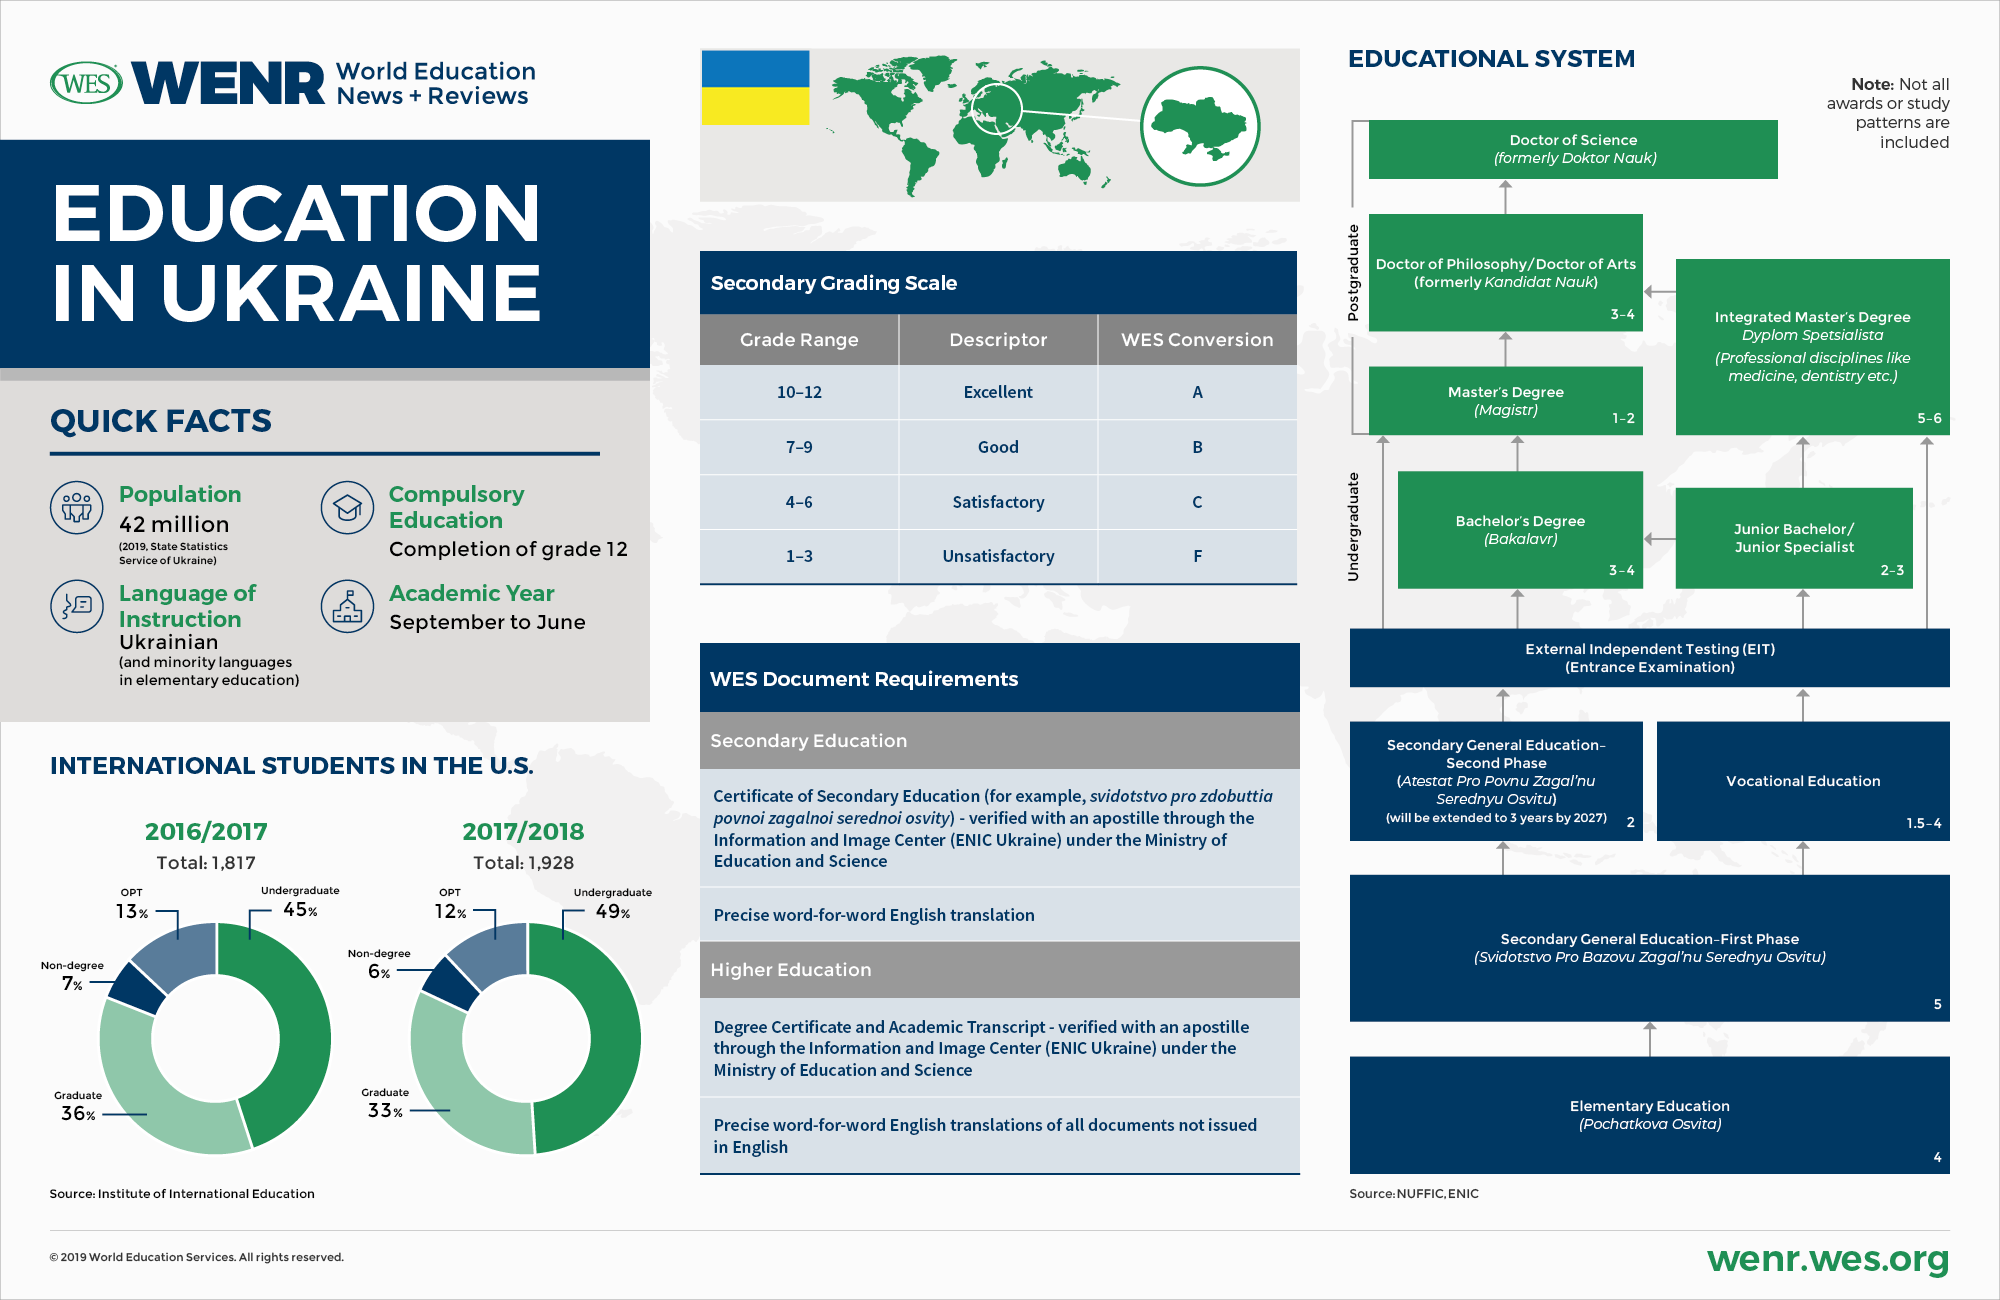 An infographic displaying quick facts about education in Ukraine